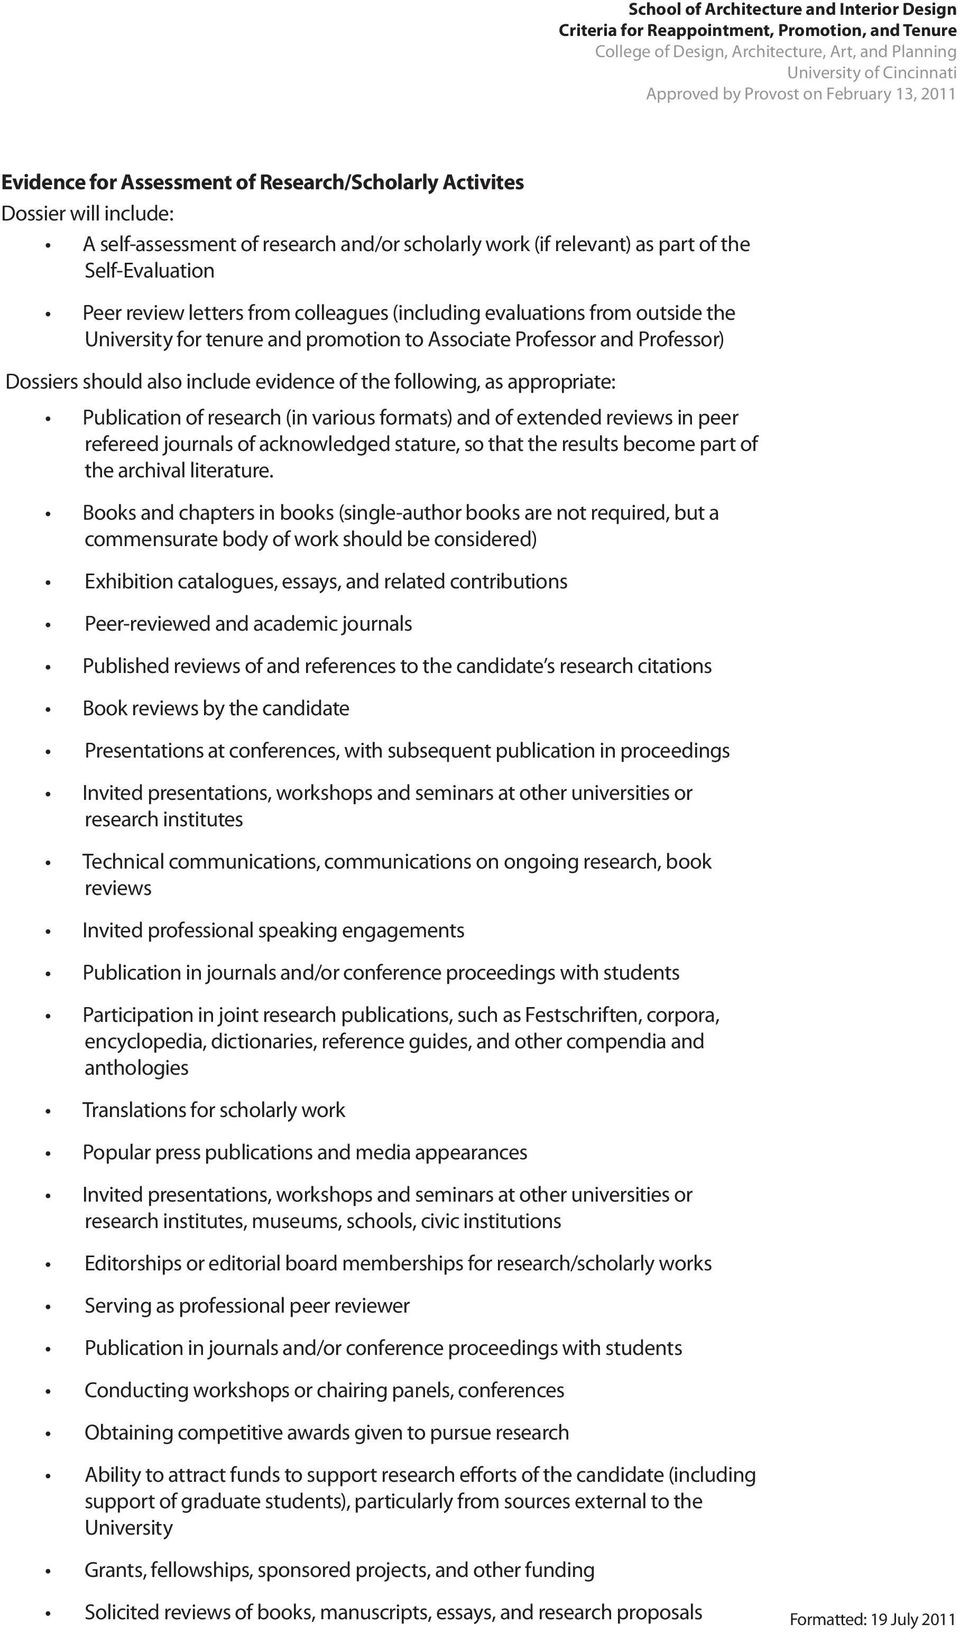 tenure promotion to Associate Professor Professor) Dossiers should also include evidence of the following, as appropriate: Publication of research (in various formats) of extended reviews in peer